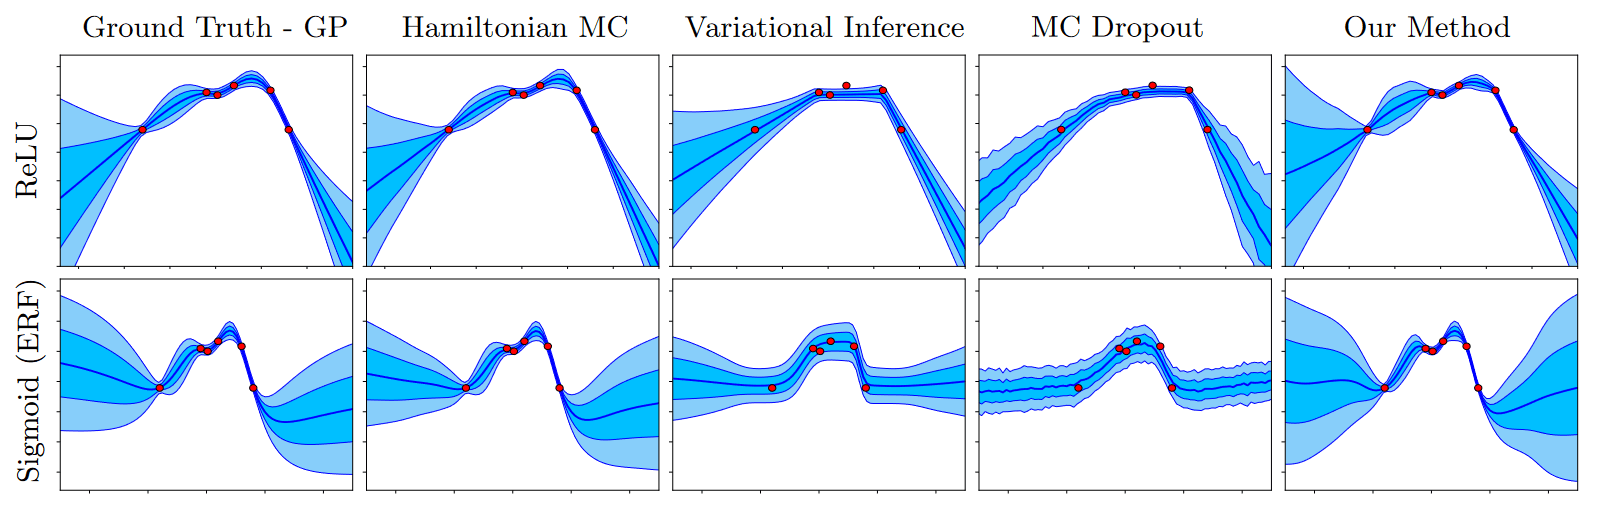 Figure showing some neural network curve fits with error bars generated by different methods.